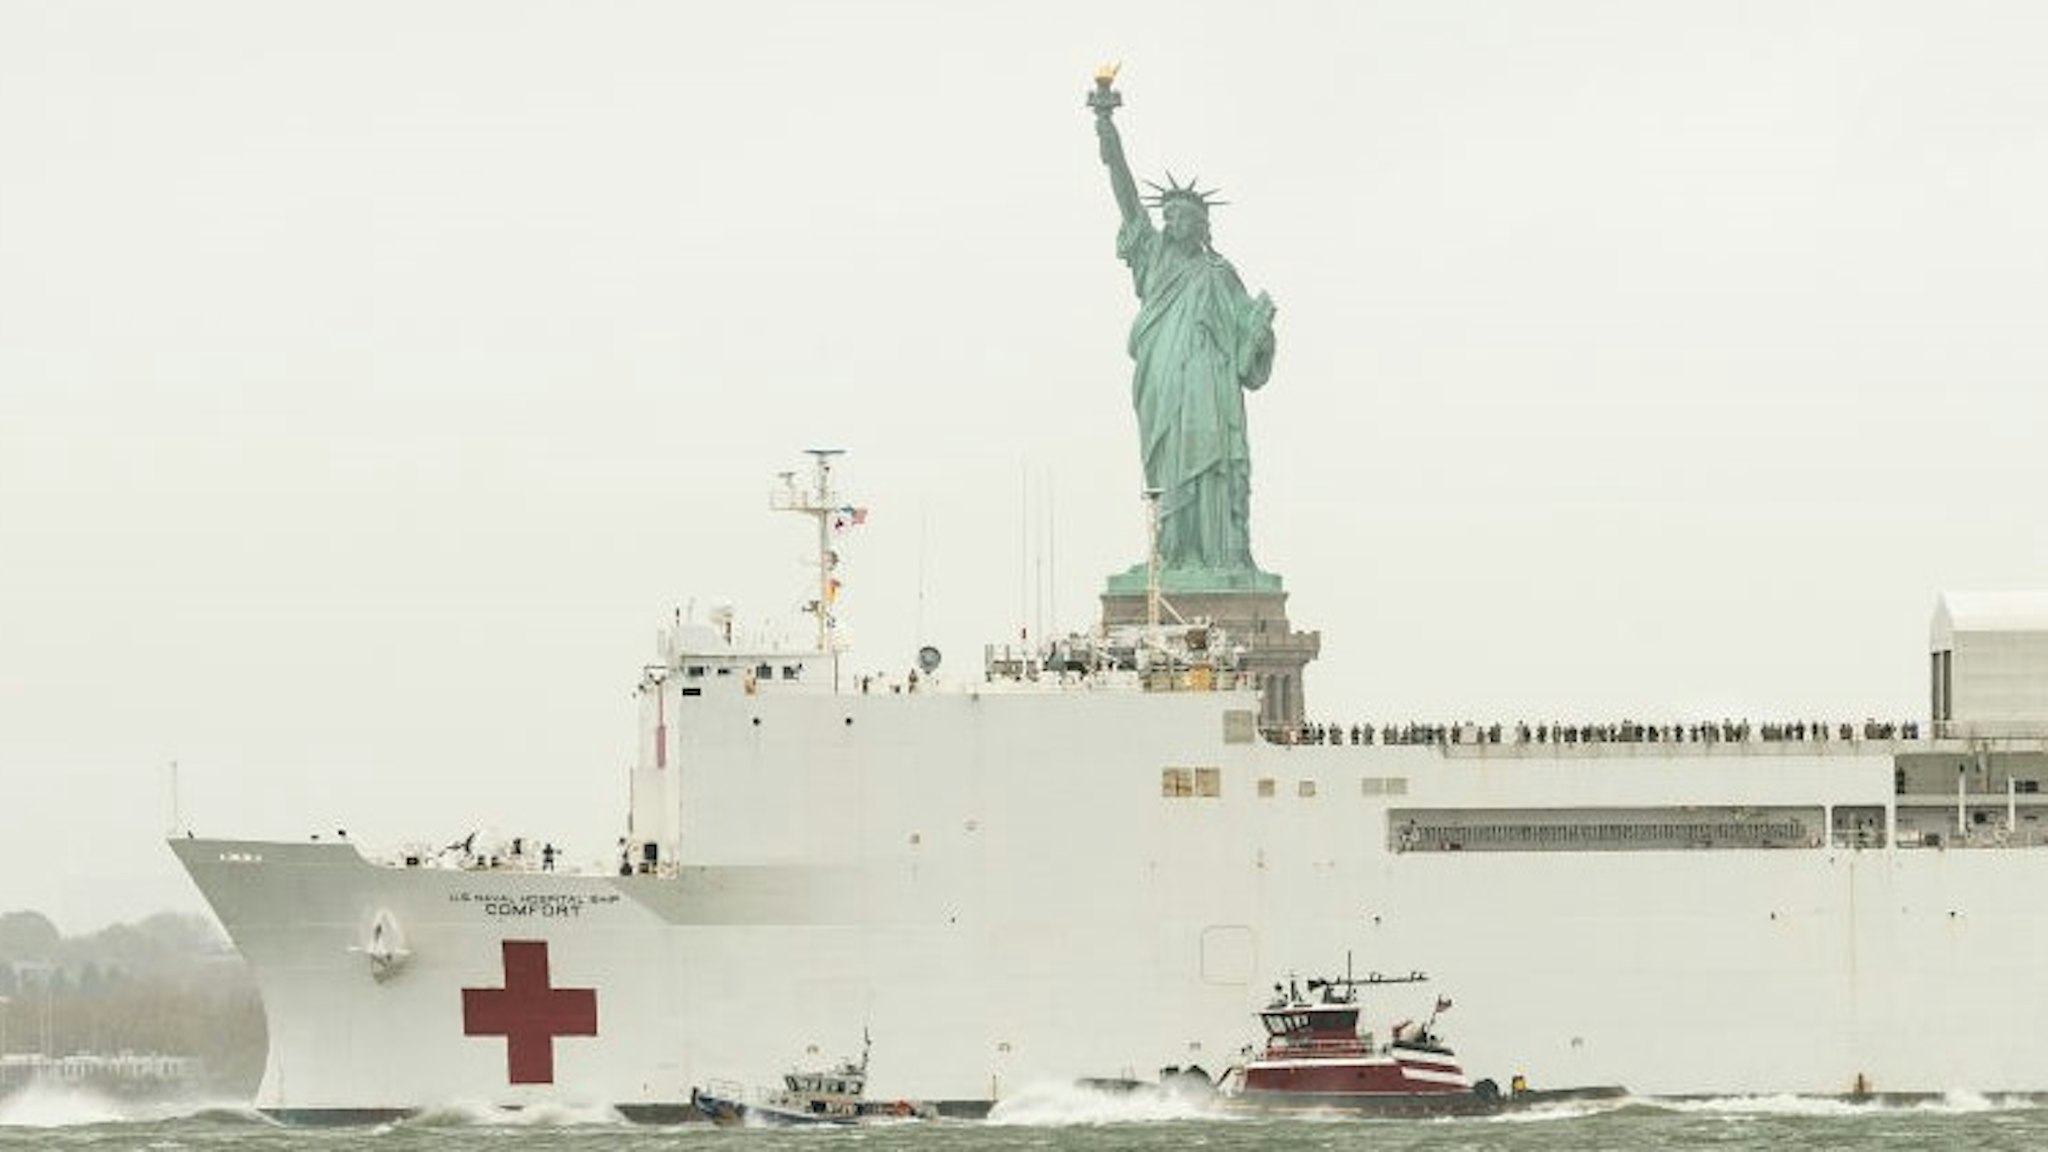 NEW YORK, UNITED STATES - 2020/04/30: On a gloomy rainy day USNS Comfort hospital ship leaves New York City in front of Statue of Liberty after treating some patients during COVID-19 pandemic. (Photo by